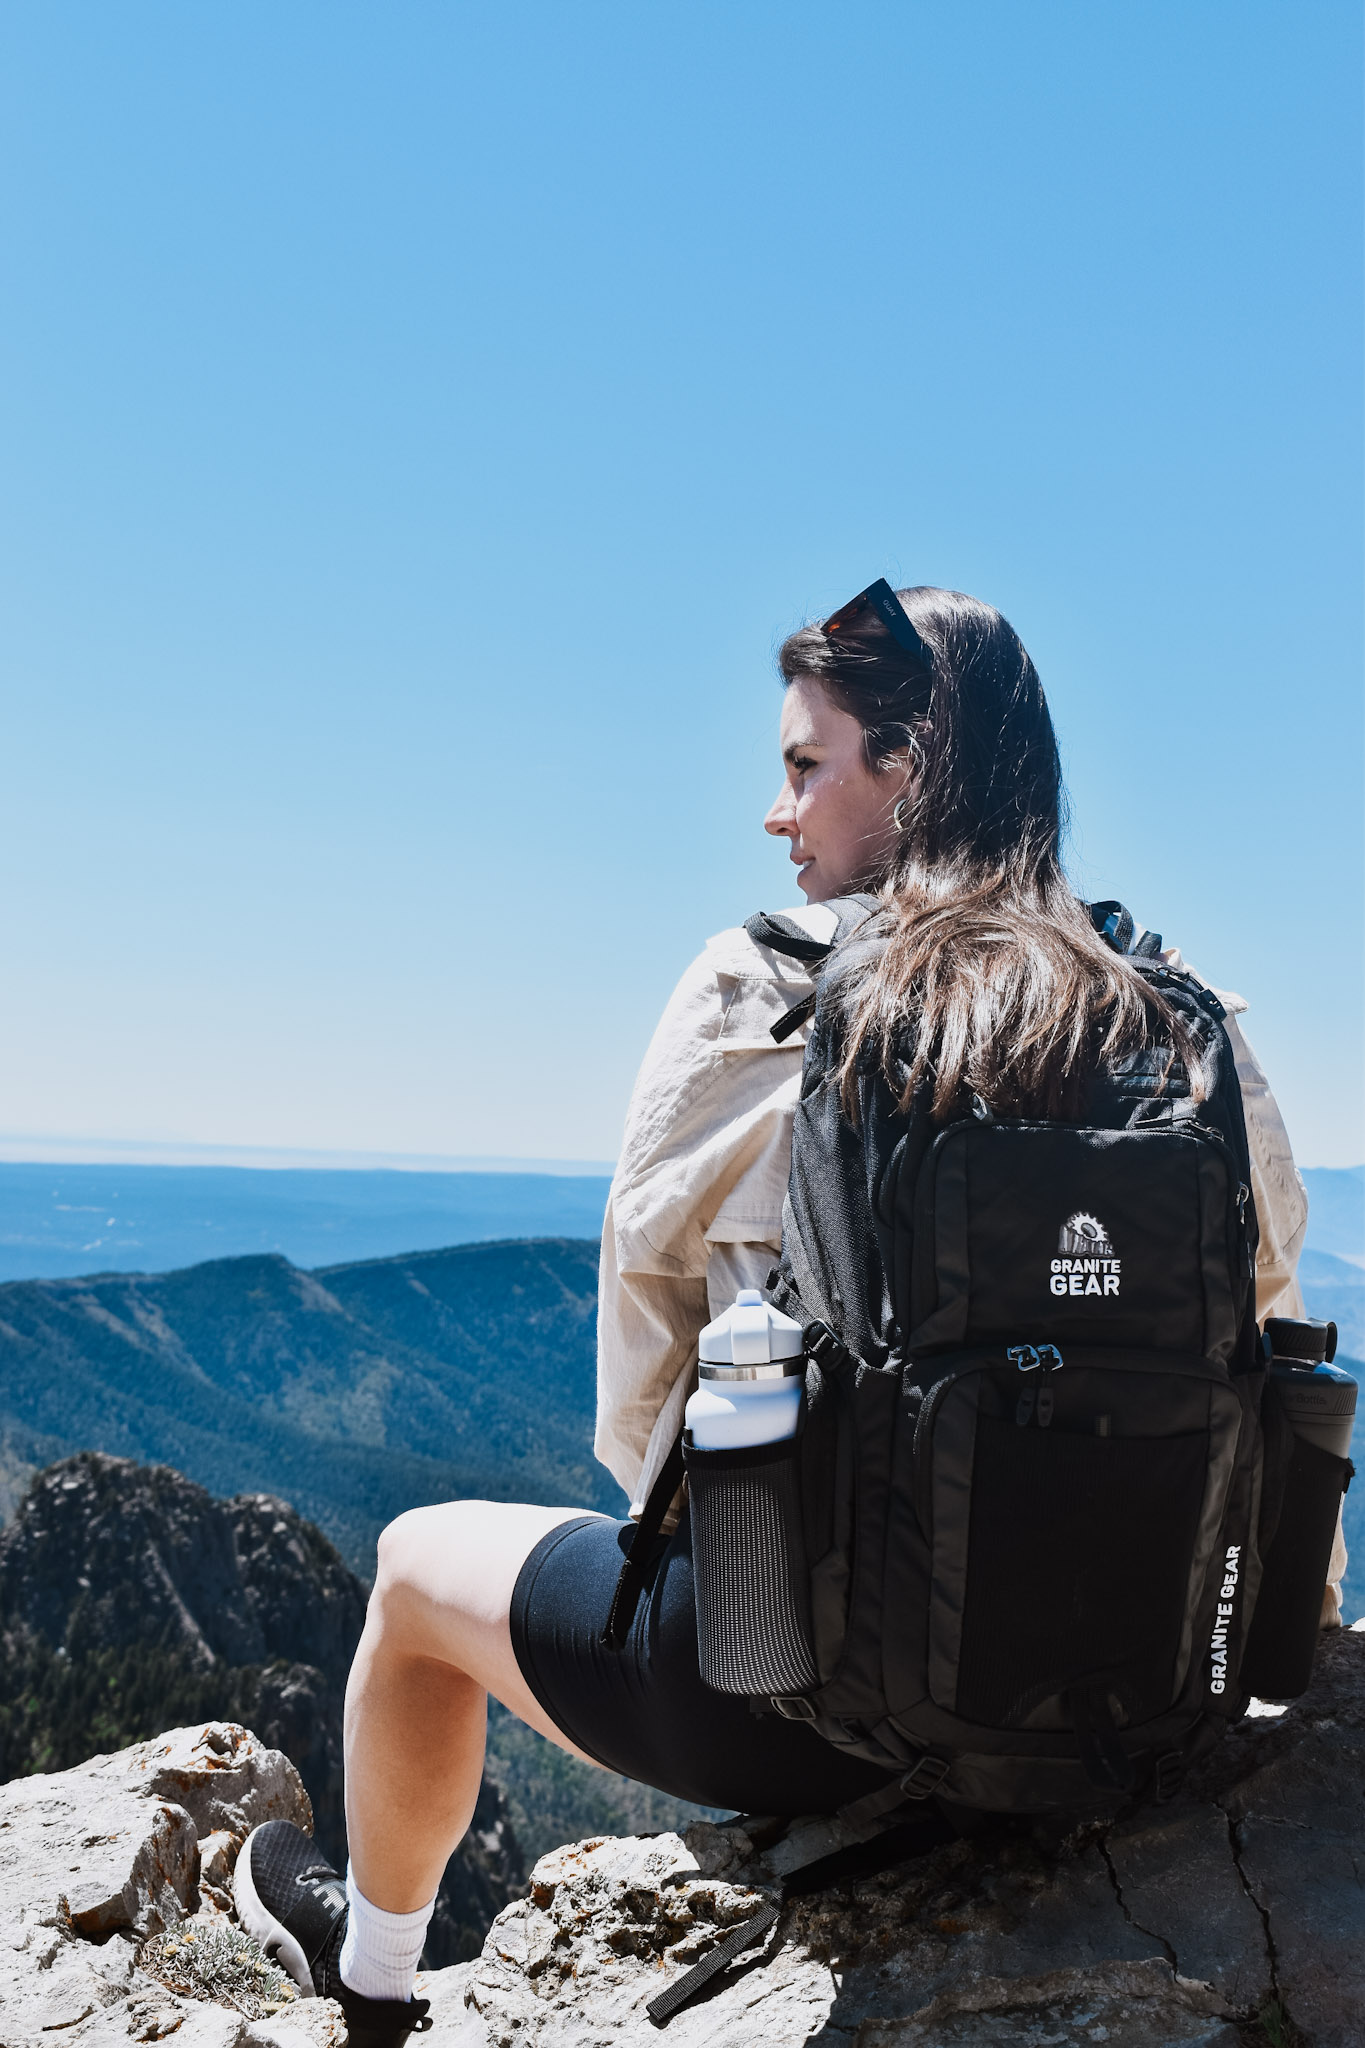 A Full Review of the Granite Gear Jackfish Backpack | KAT TELLS ALL